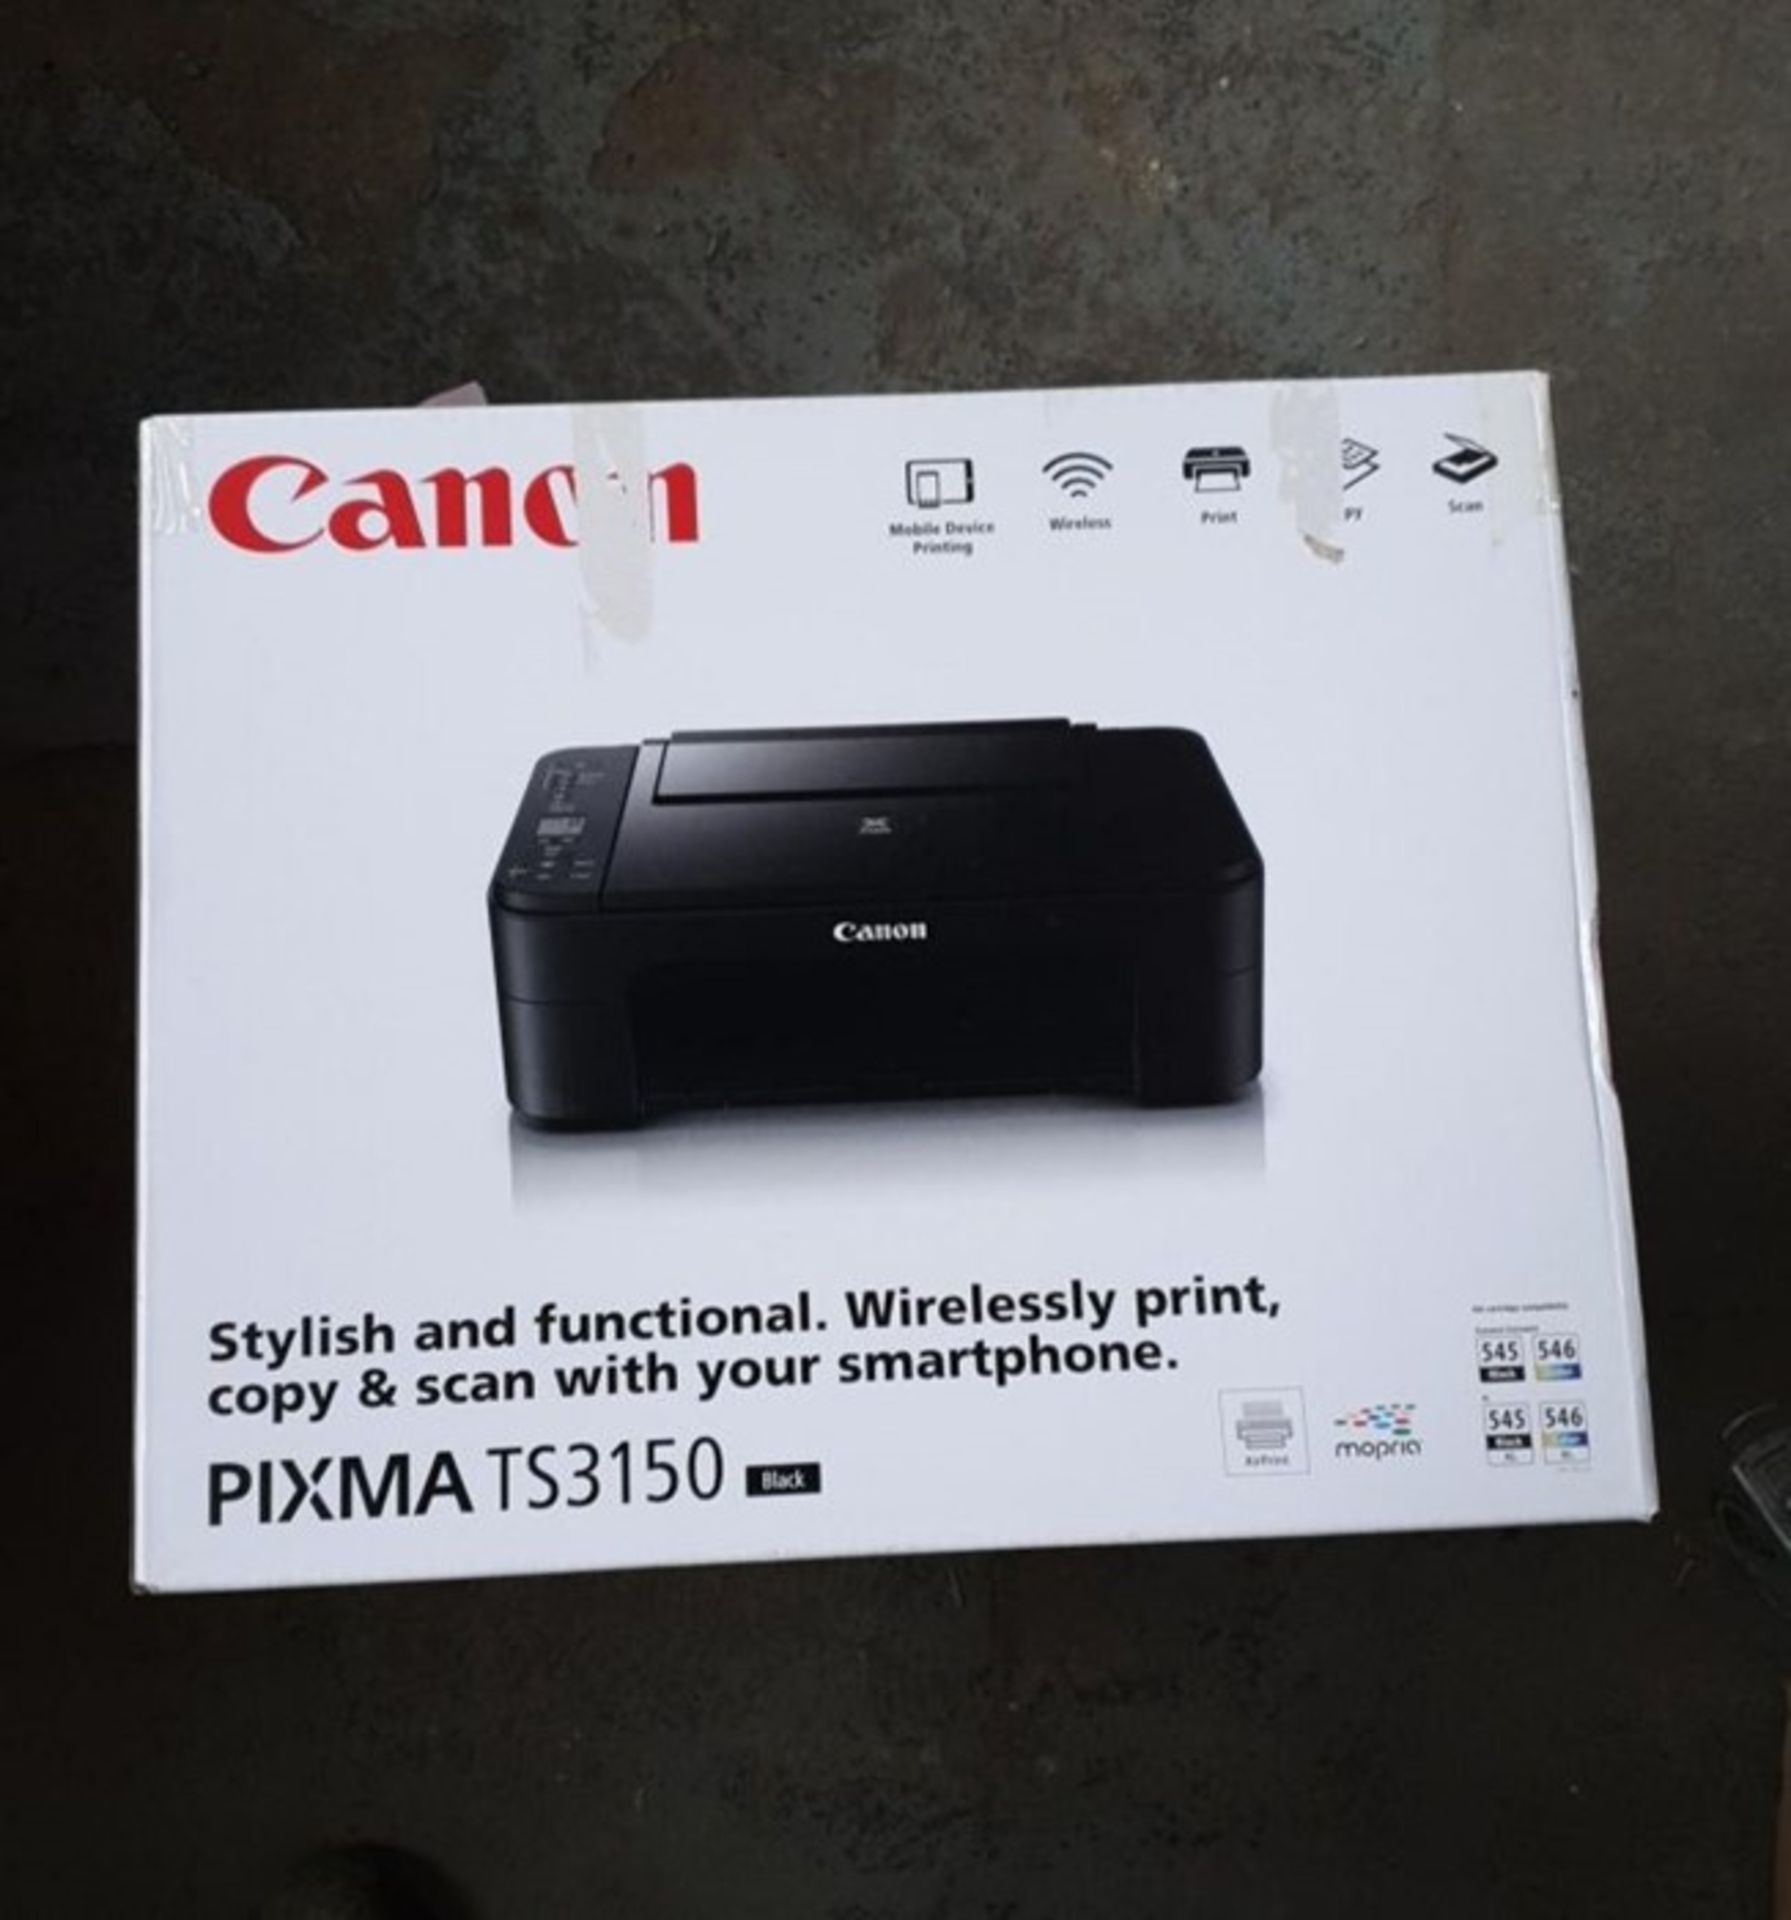 1 BOXED CANON PIXMA TS3150 ALL-IN-ONE INKJET PRINTER / BL 5533 / RRP £49.99 (VIEWING HIGHLY